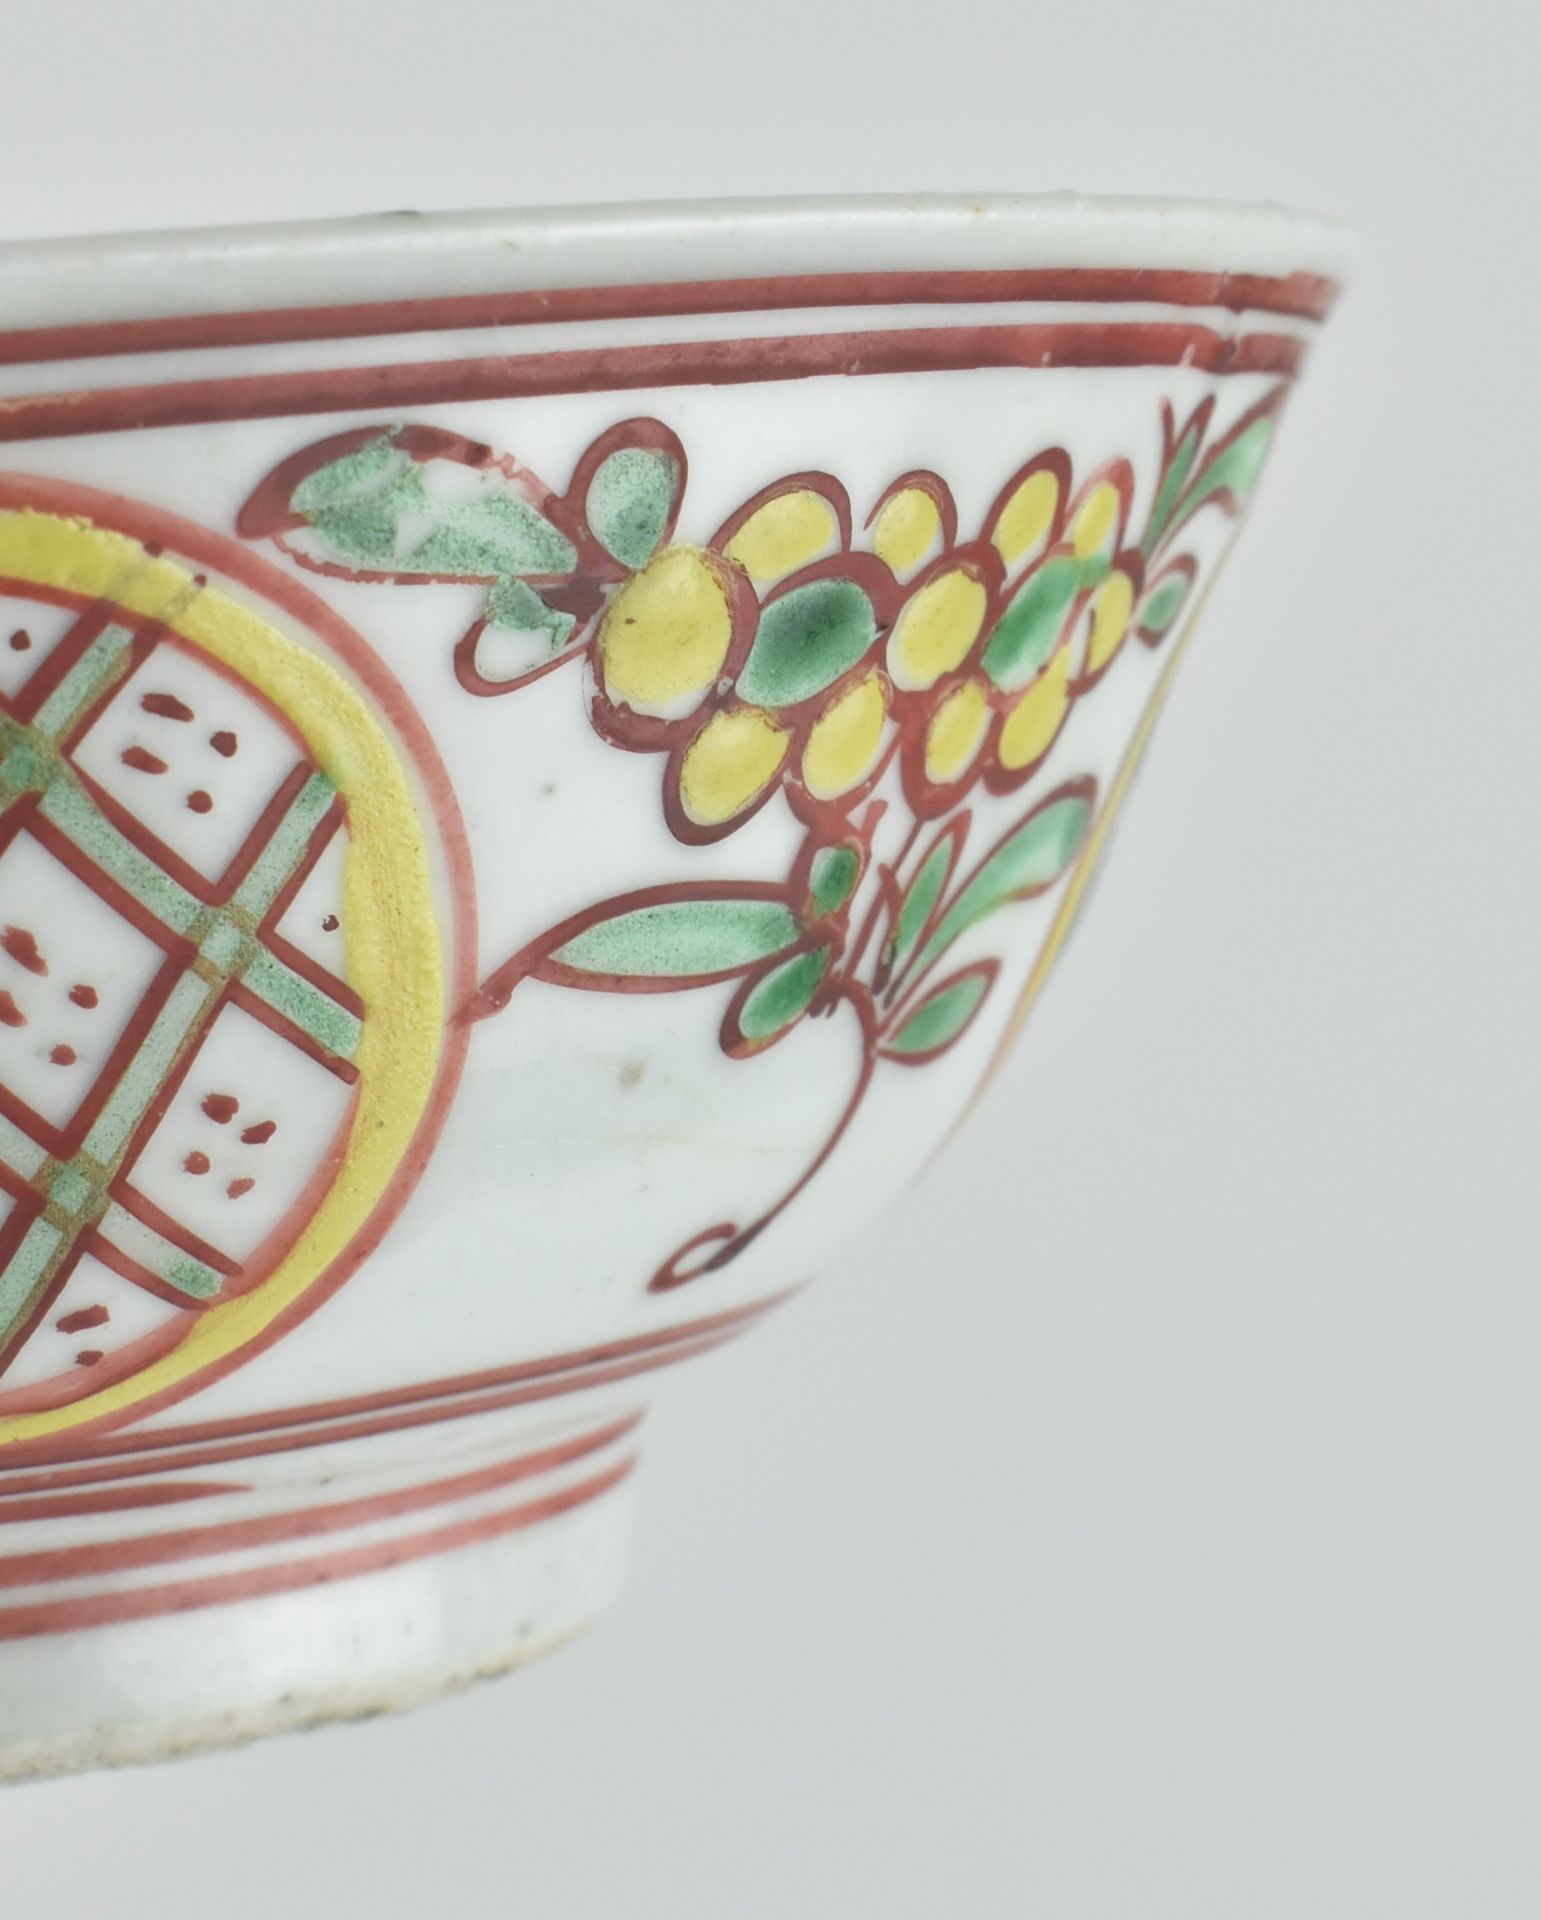 MING OR LATER TRI-COLOURED BOWL 明 红黄绿彩绘碗 - Image 6 of 6